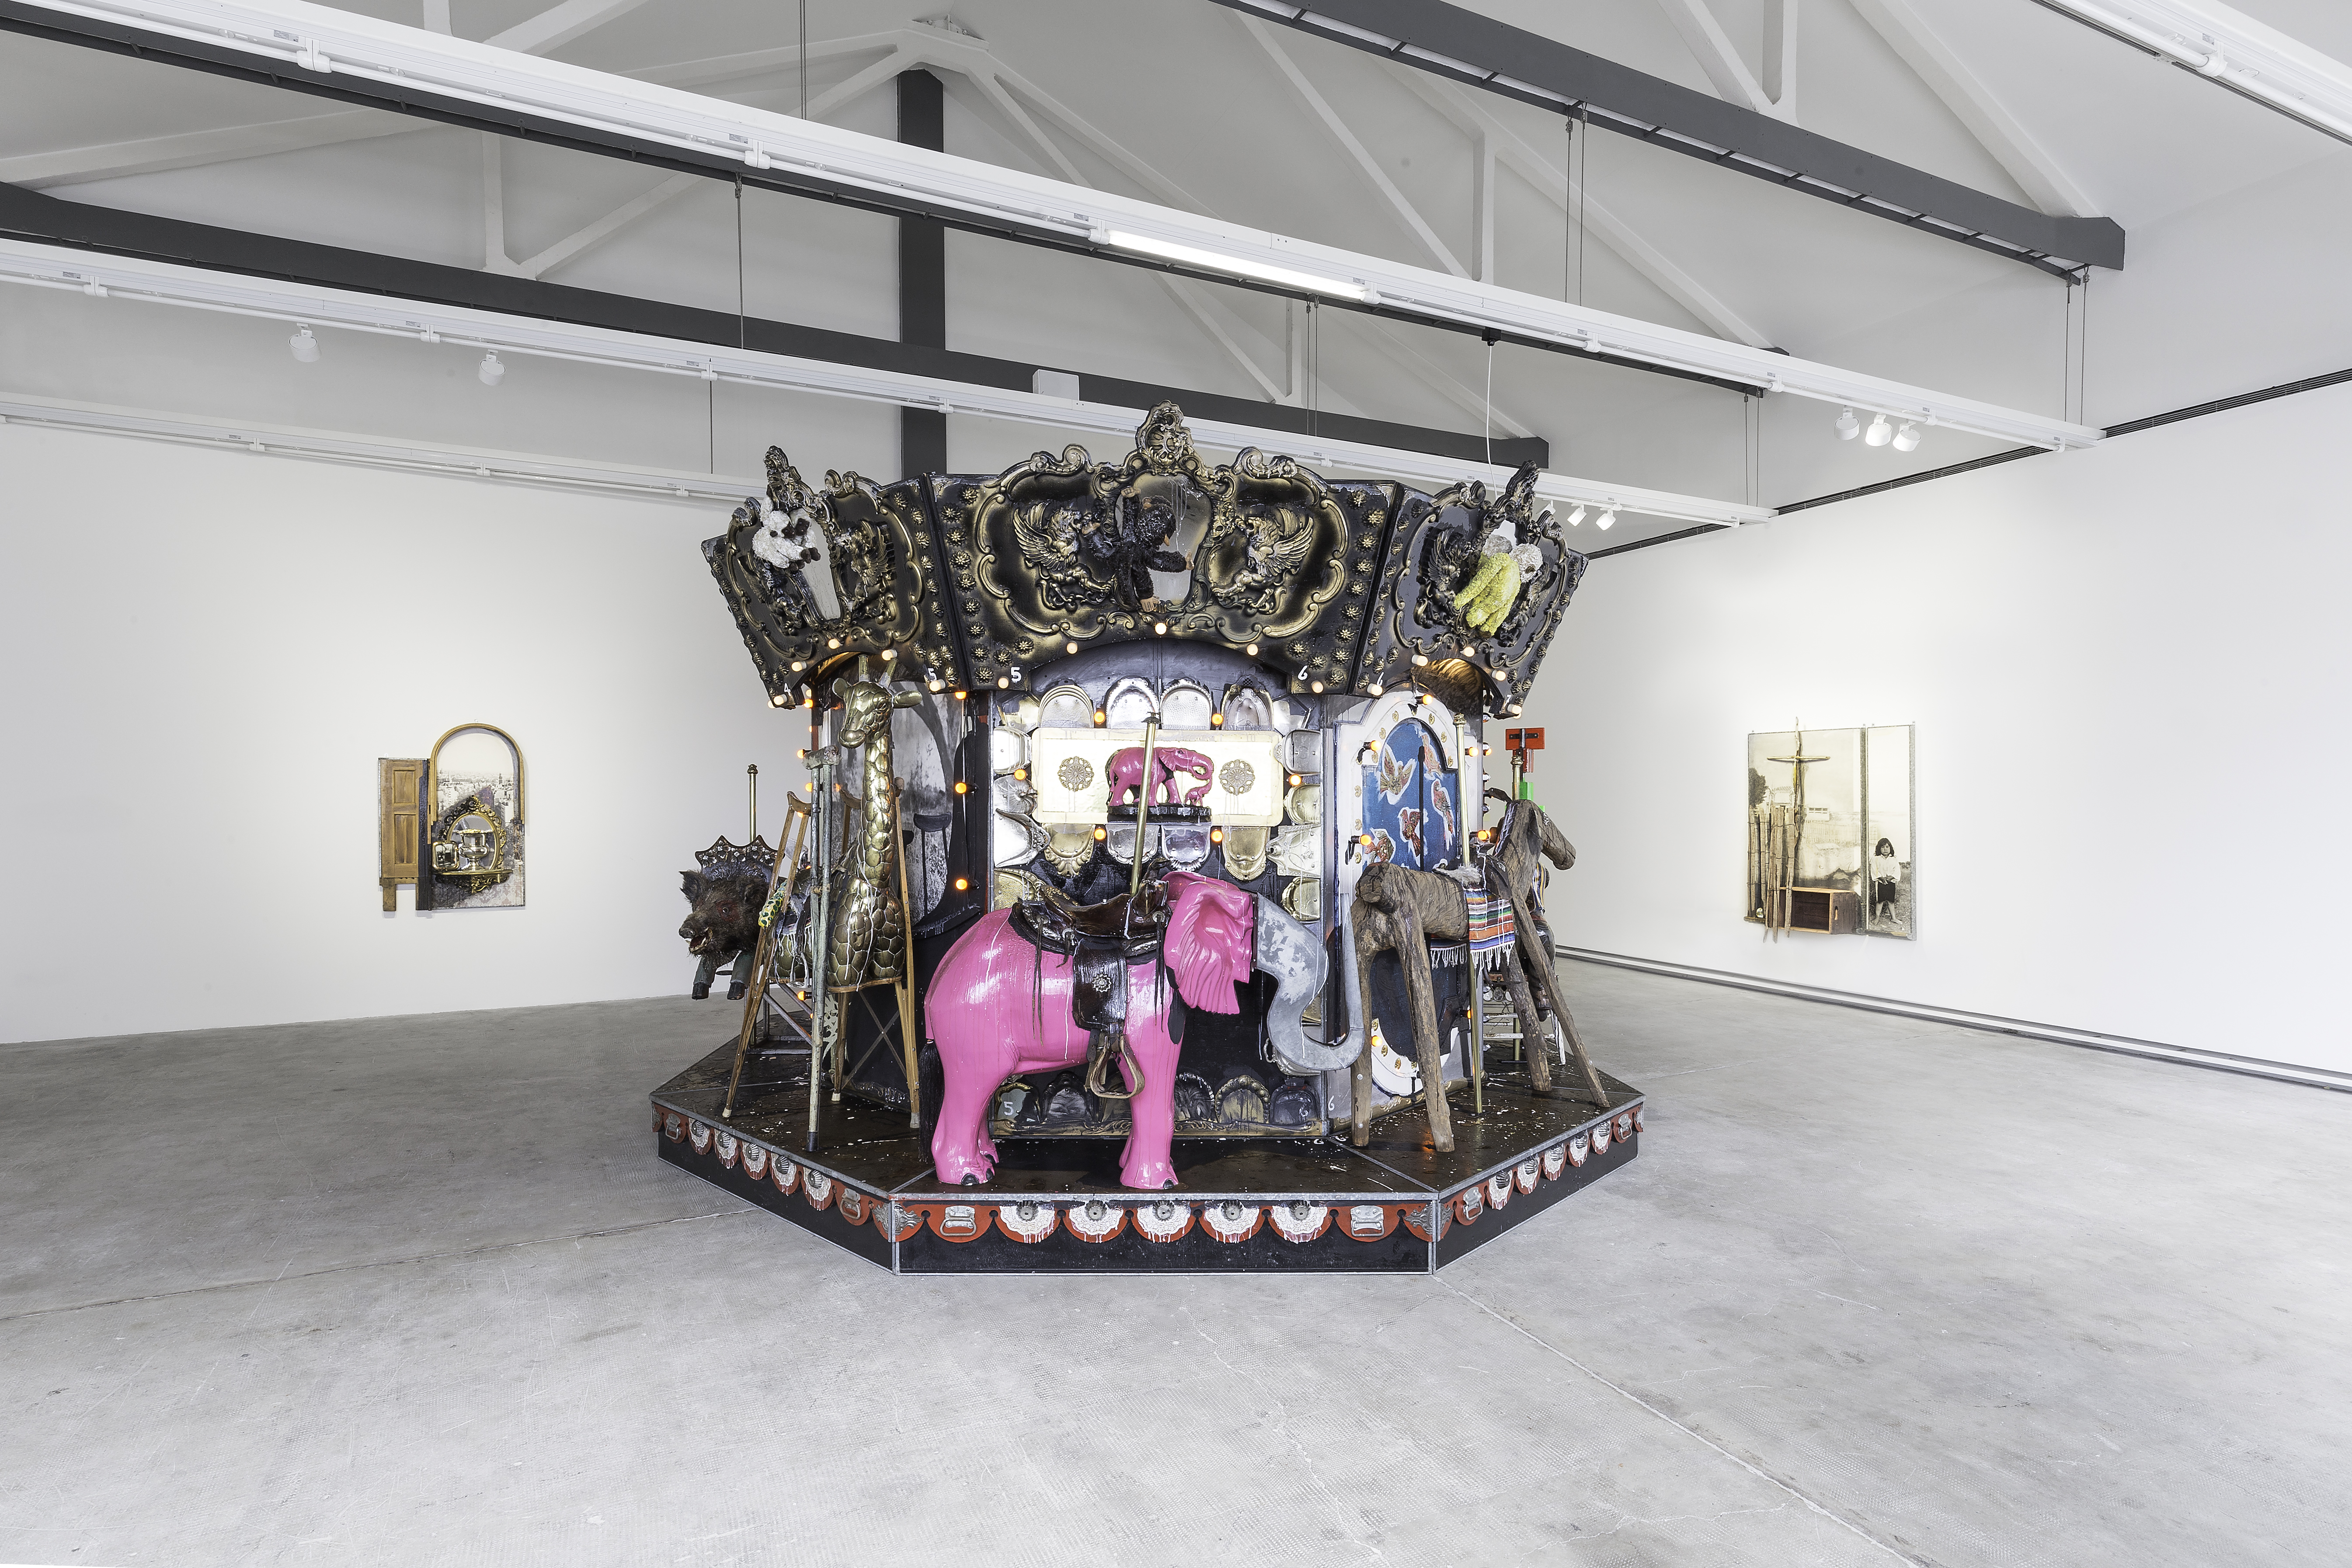 Edward Kienholz, The Merry-Go-World or Begat by Chance and the Wonder Horse Trigger, 1991-94 - foto Delfino Sisto Legnani